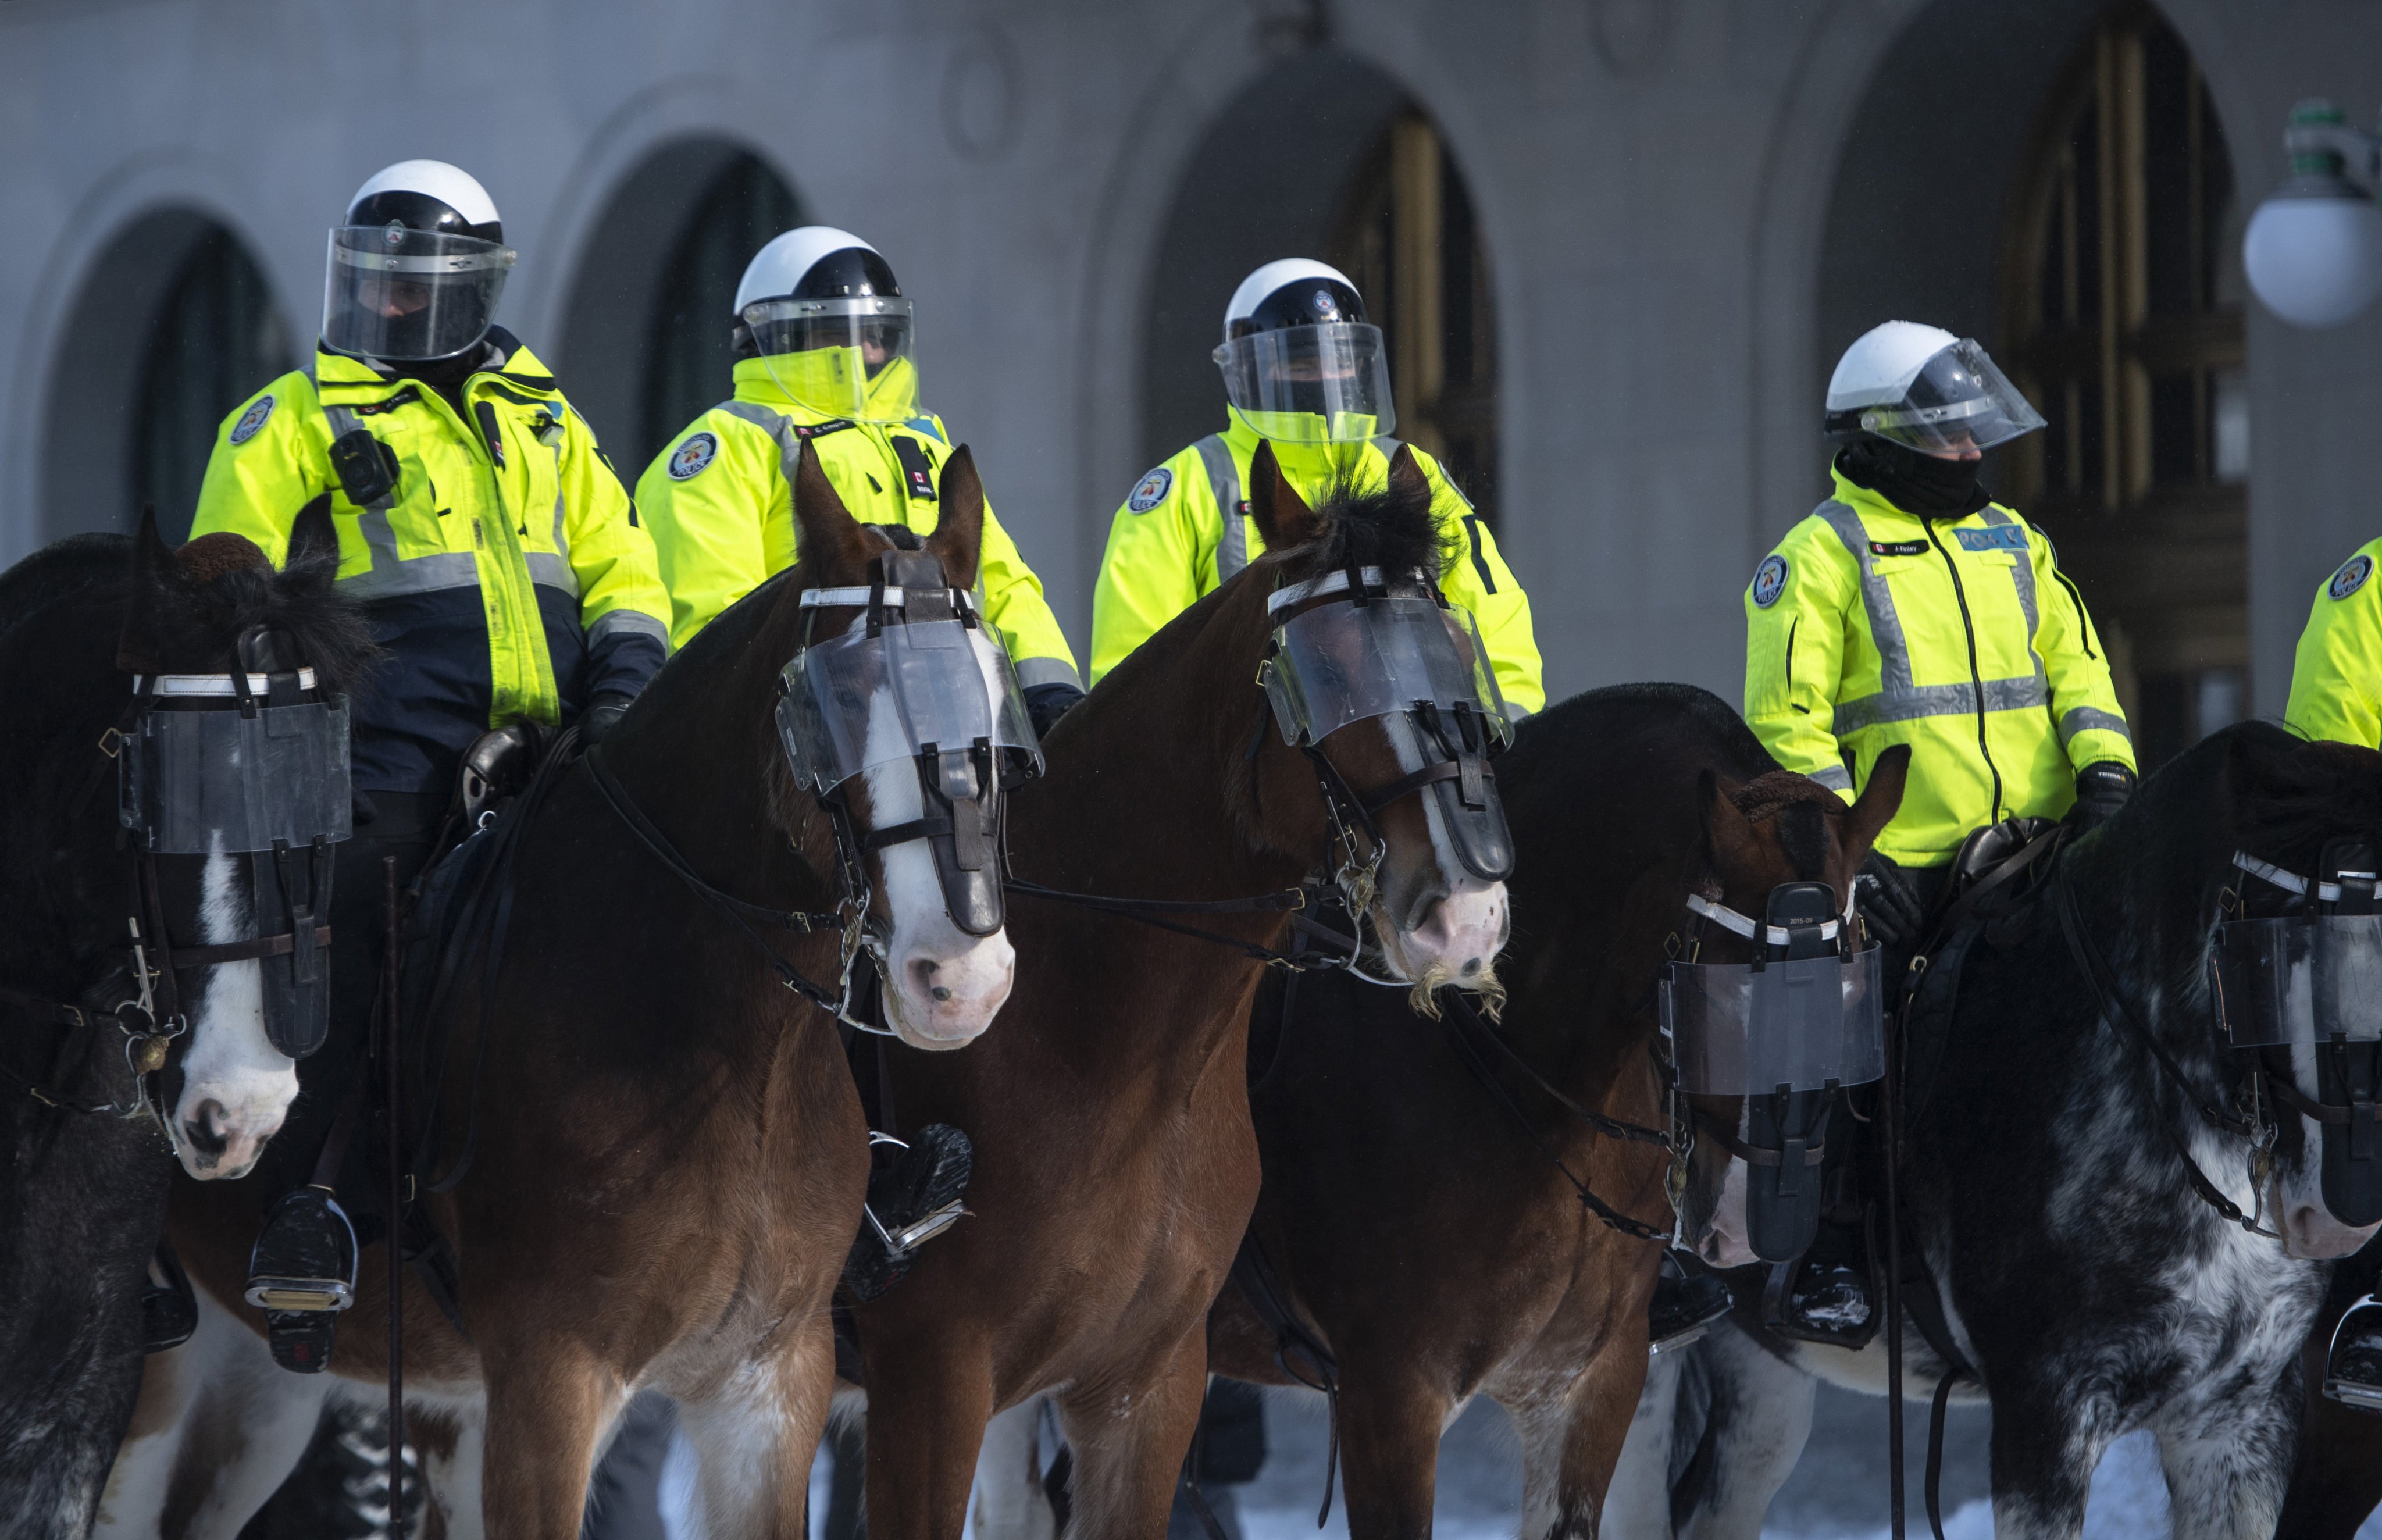 A mounted police unit stands by as officers work to clear the protesters in Ottawa. Photo: The Canadian Press via AP